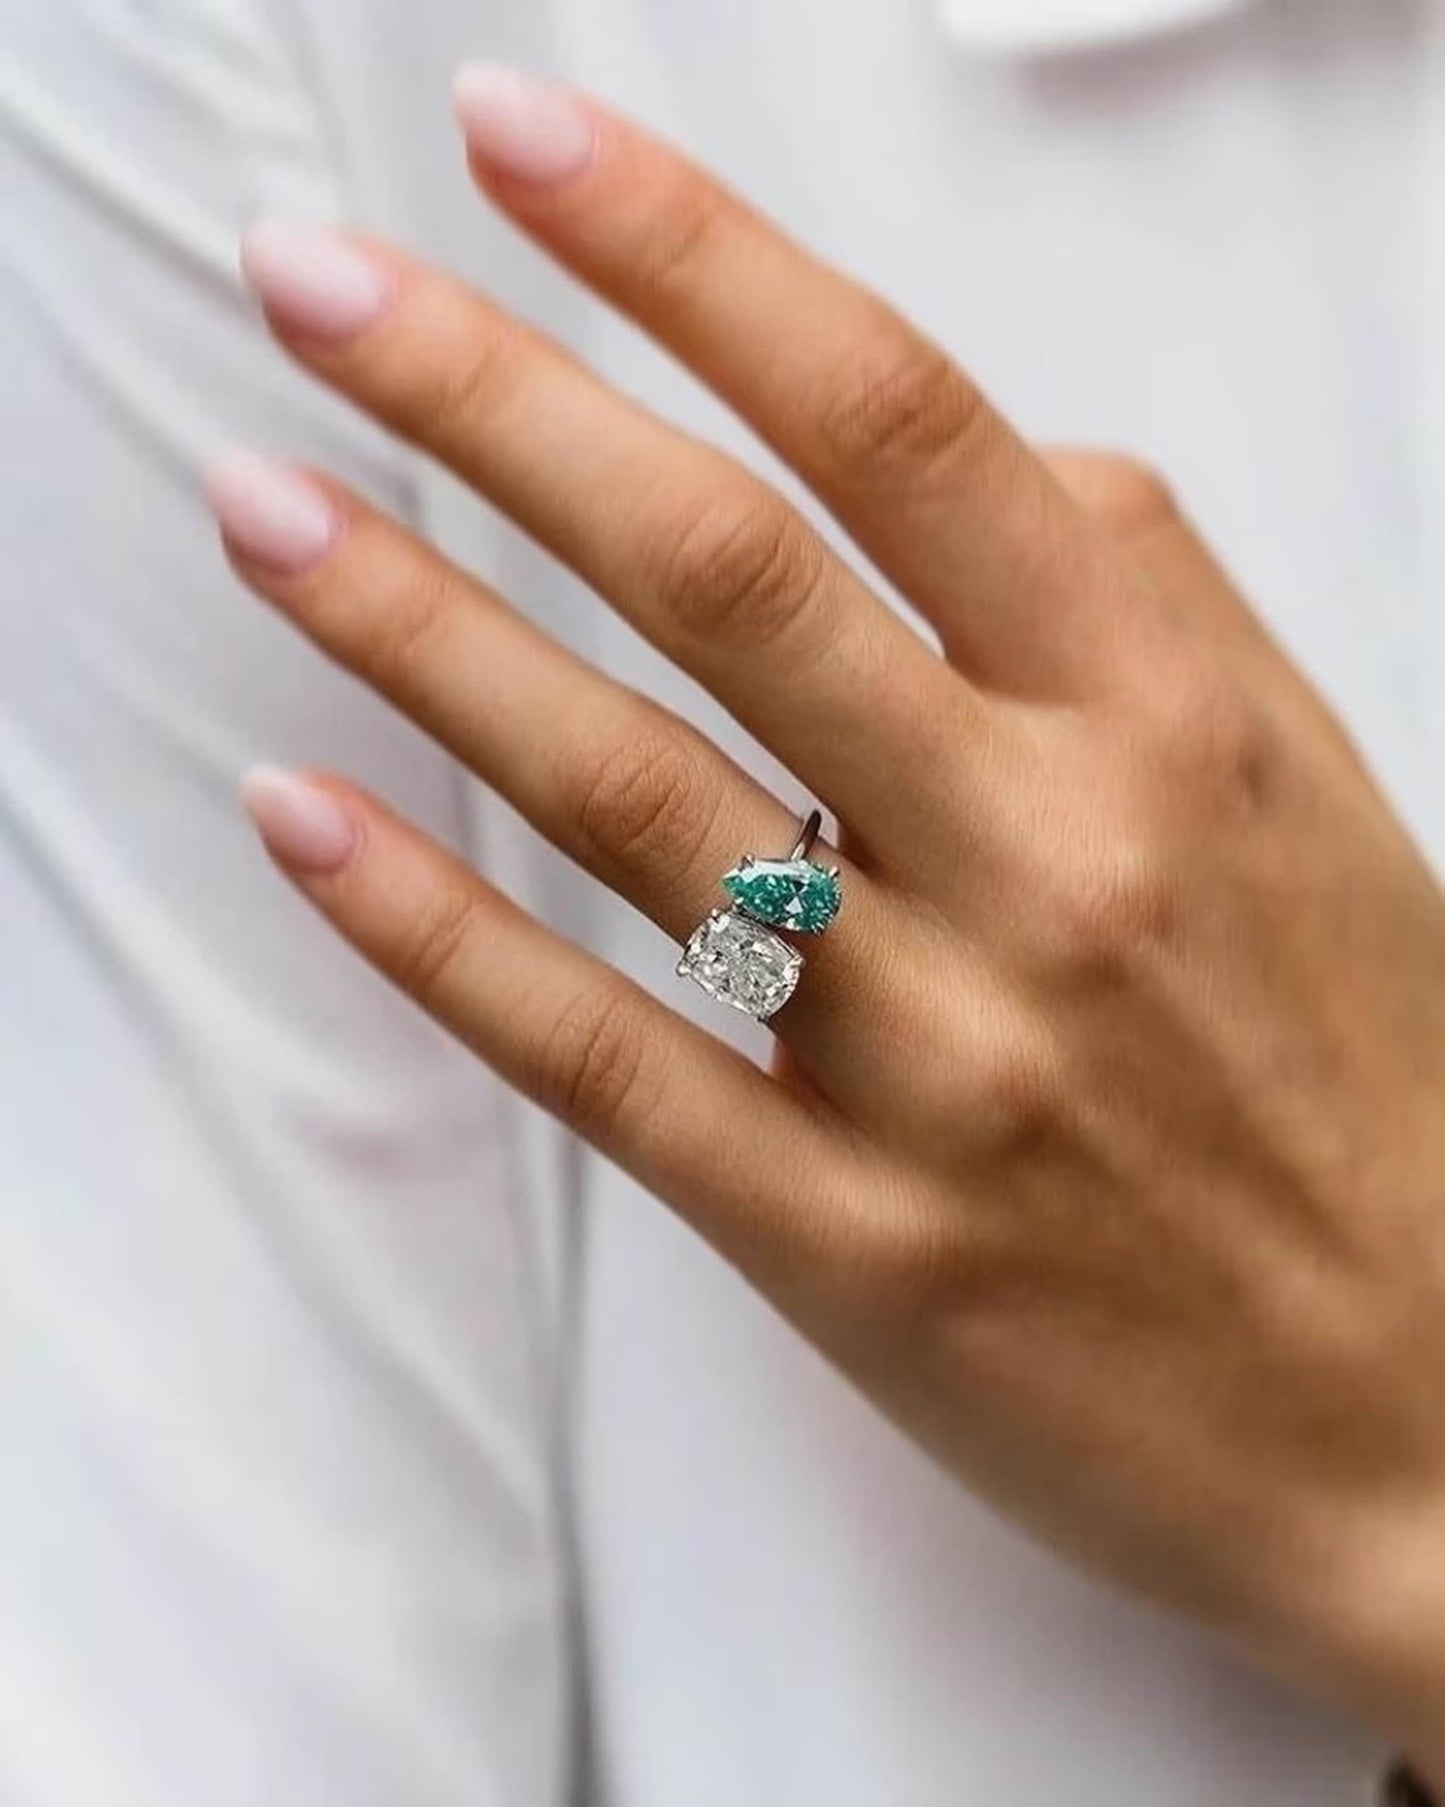 Charming Aqua Pear Shape Ring/Colorless Cushion CZ Stone Solitaire Ring/Toi Et Moi Two Stone Ring/14K White Gold Gemstone Ring